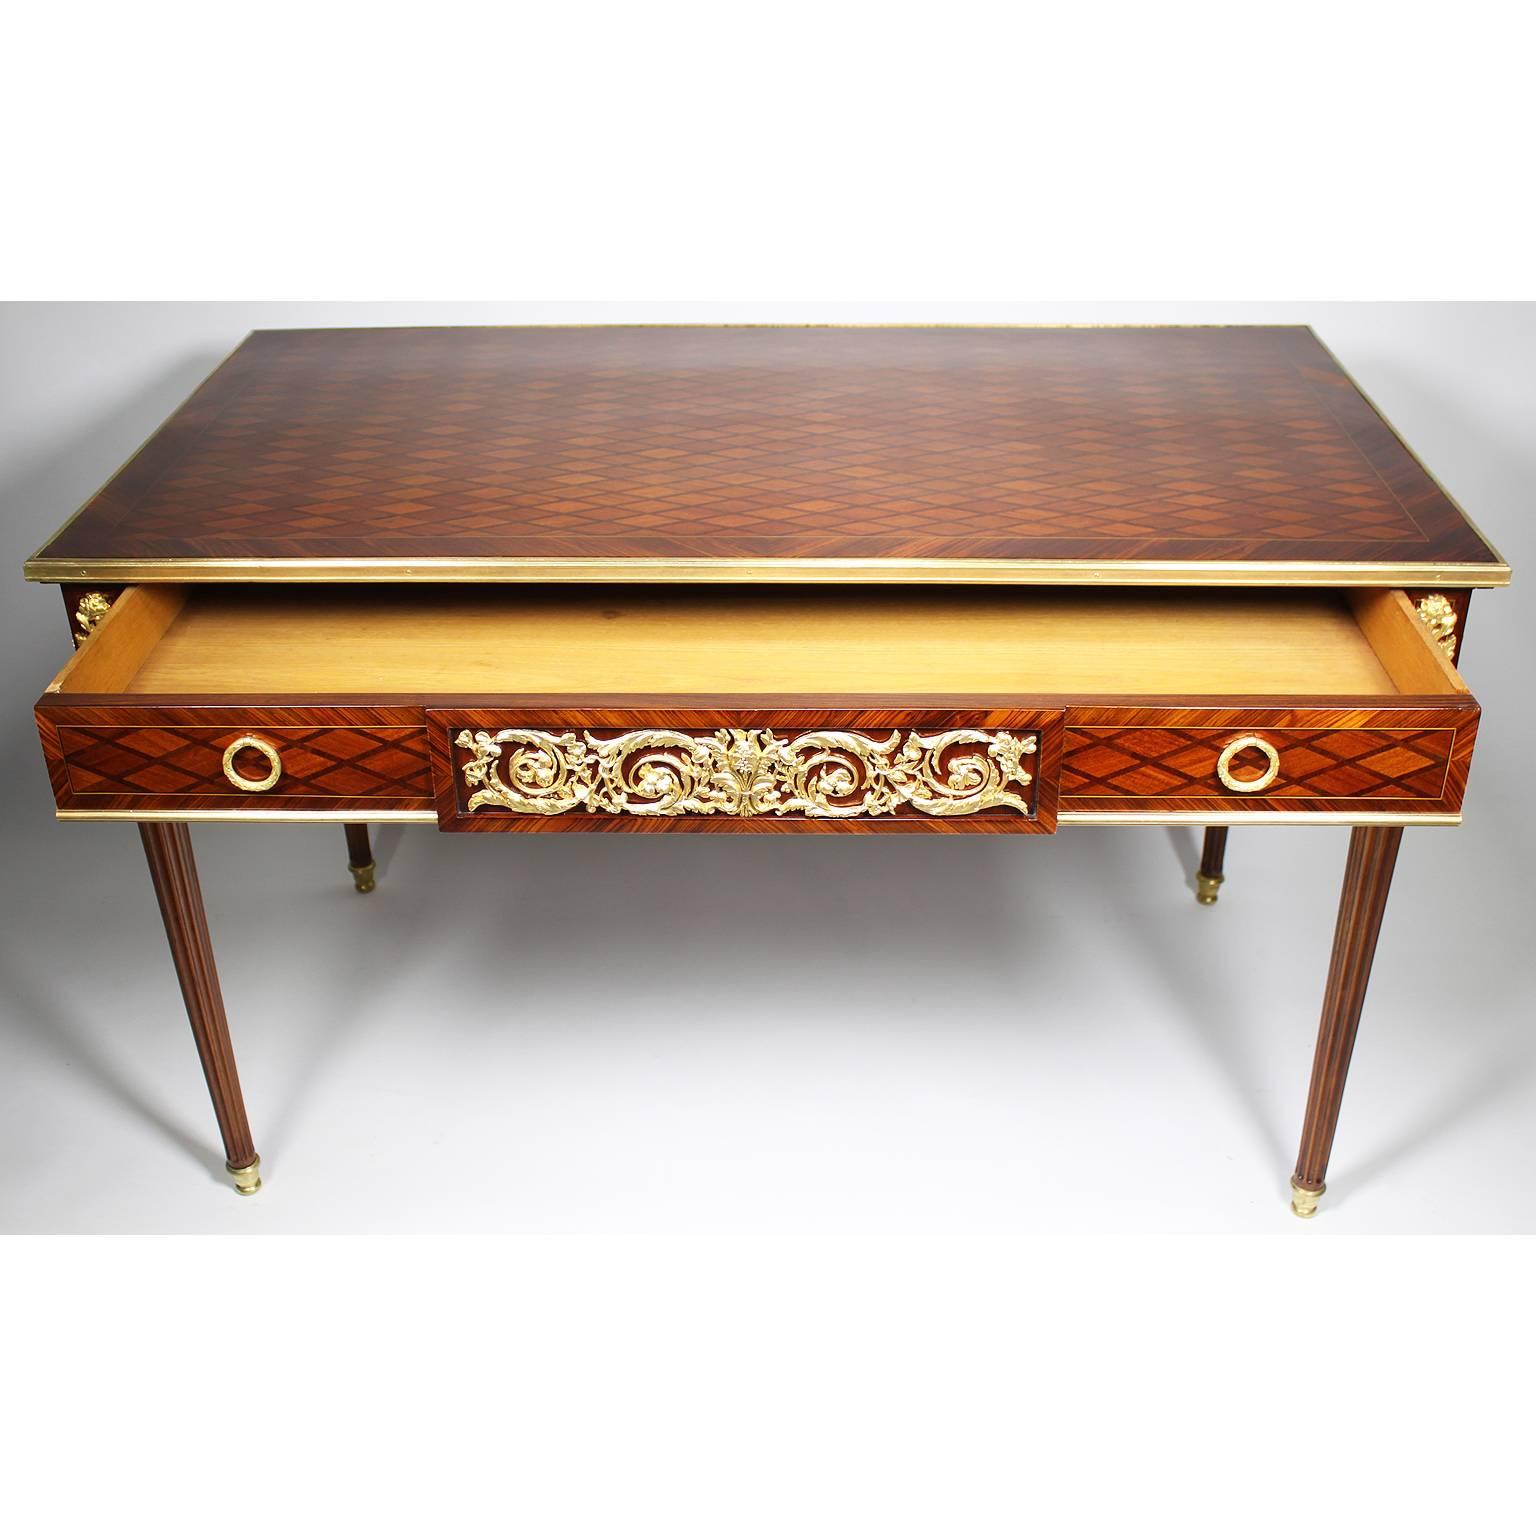 French Louis XVI Style Kingwood Parquetry & Ormolu Mounted Ladies Writing Table For Sale 1